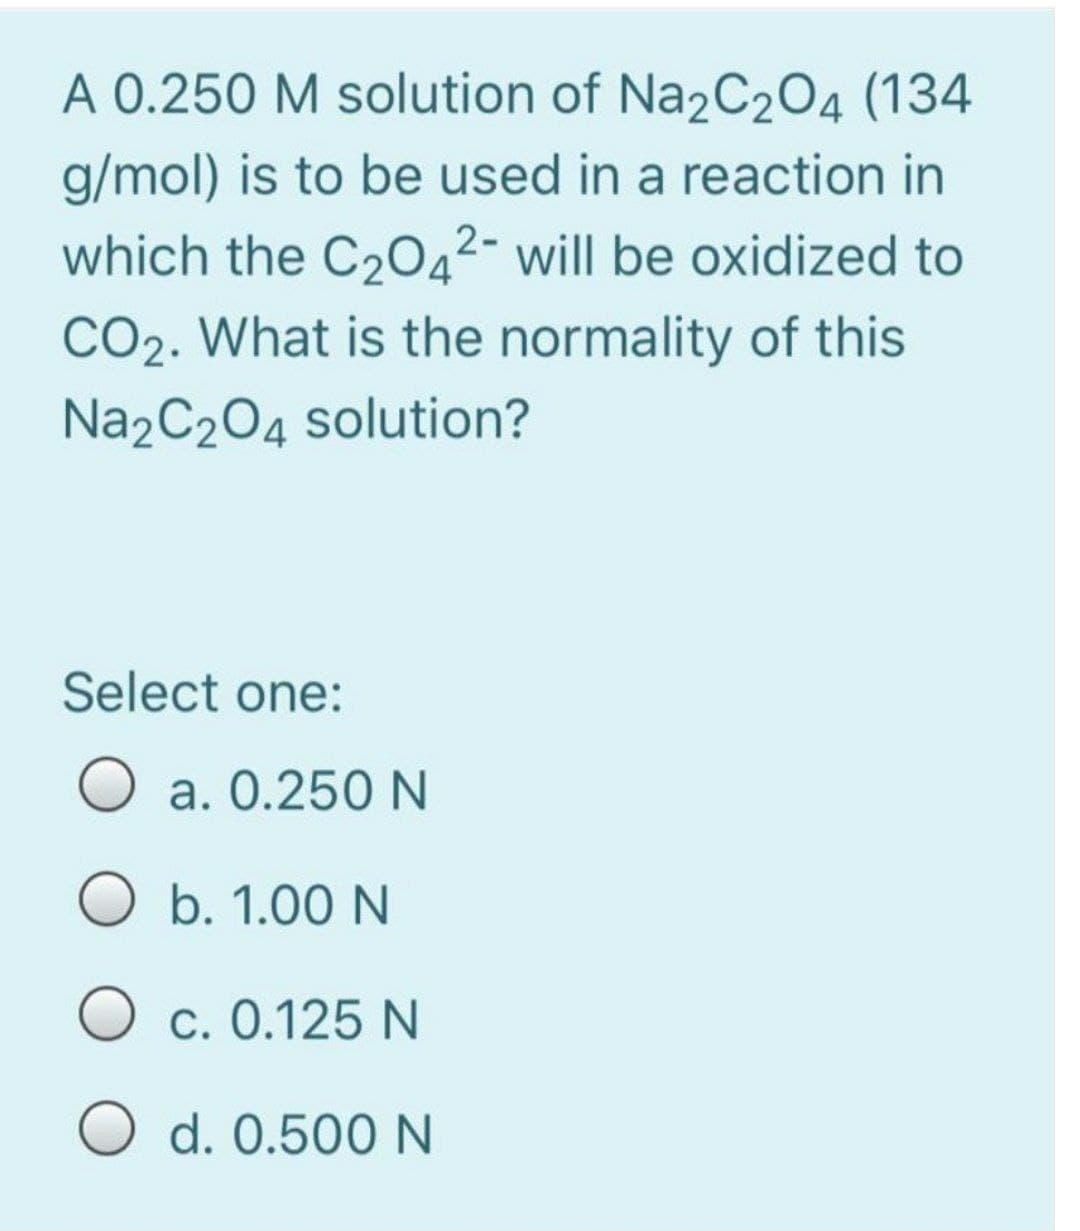 A 0.250 M solution of Na2C204 (134
g/mol) is to be used in a reaction in
which the C2042- will be oxidized to
CO2. What is the normality of this
Na2C204 solution?
Select one:
a. 0.250 N
O b. 1.00 N
O c. 0.125N
O d. 0.500 N
